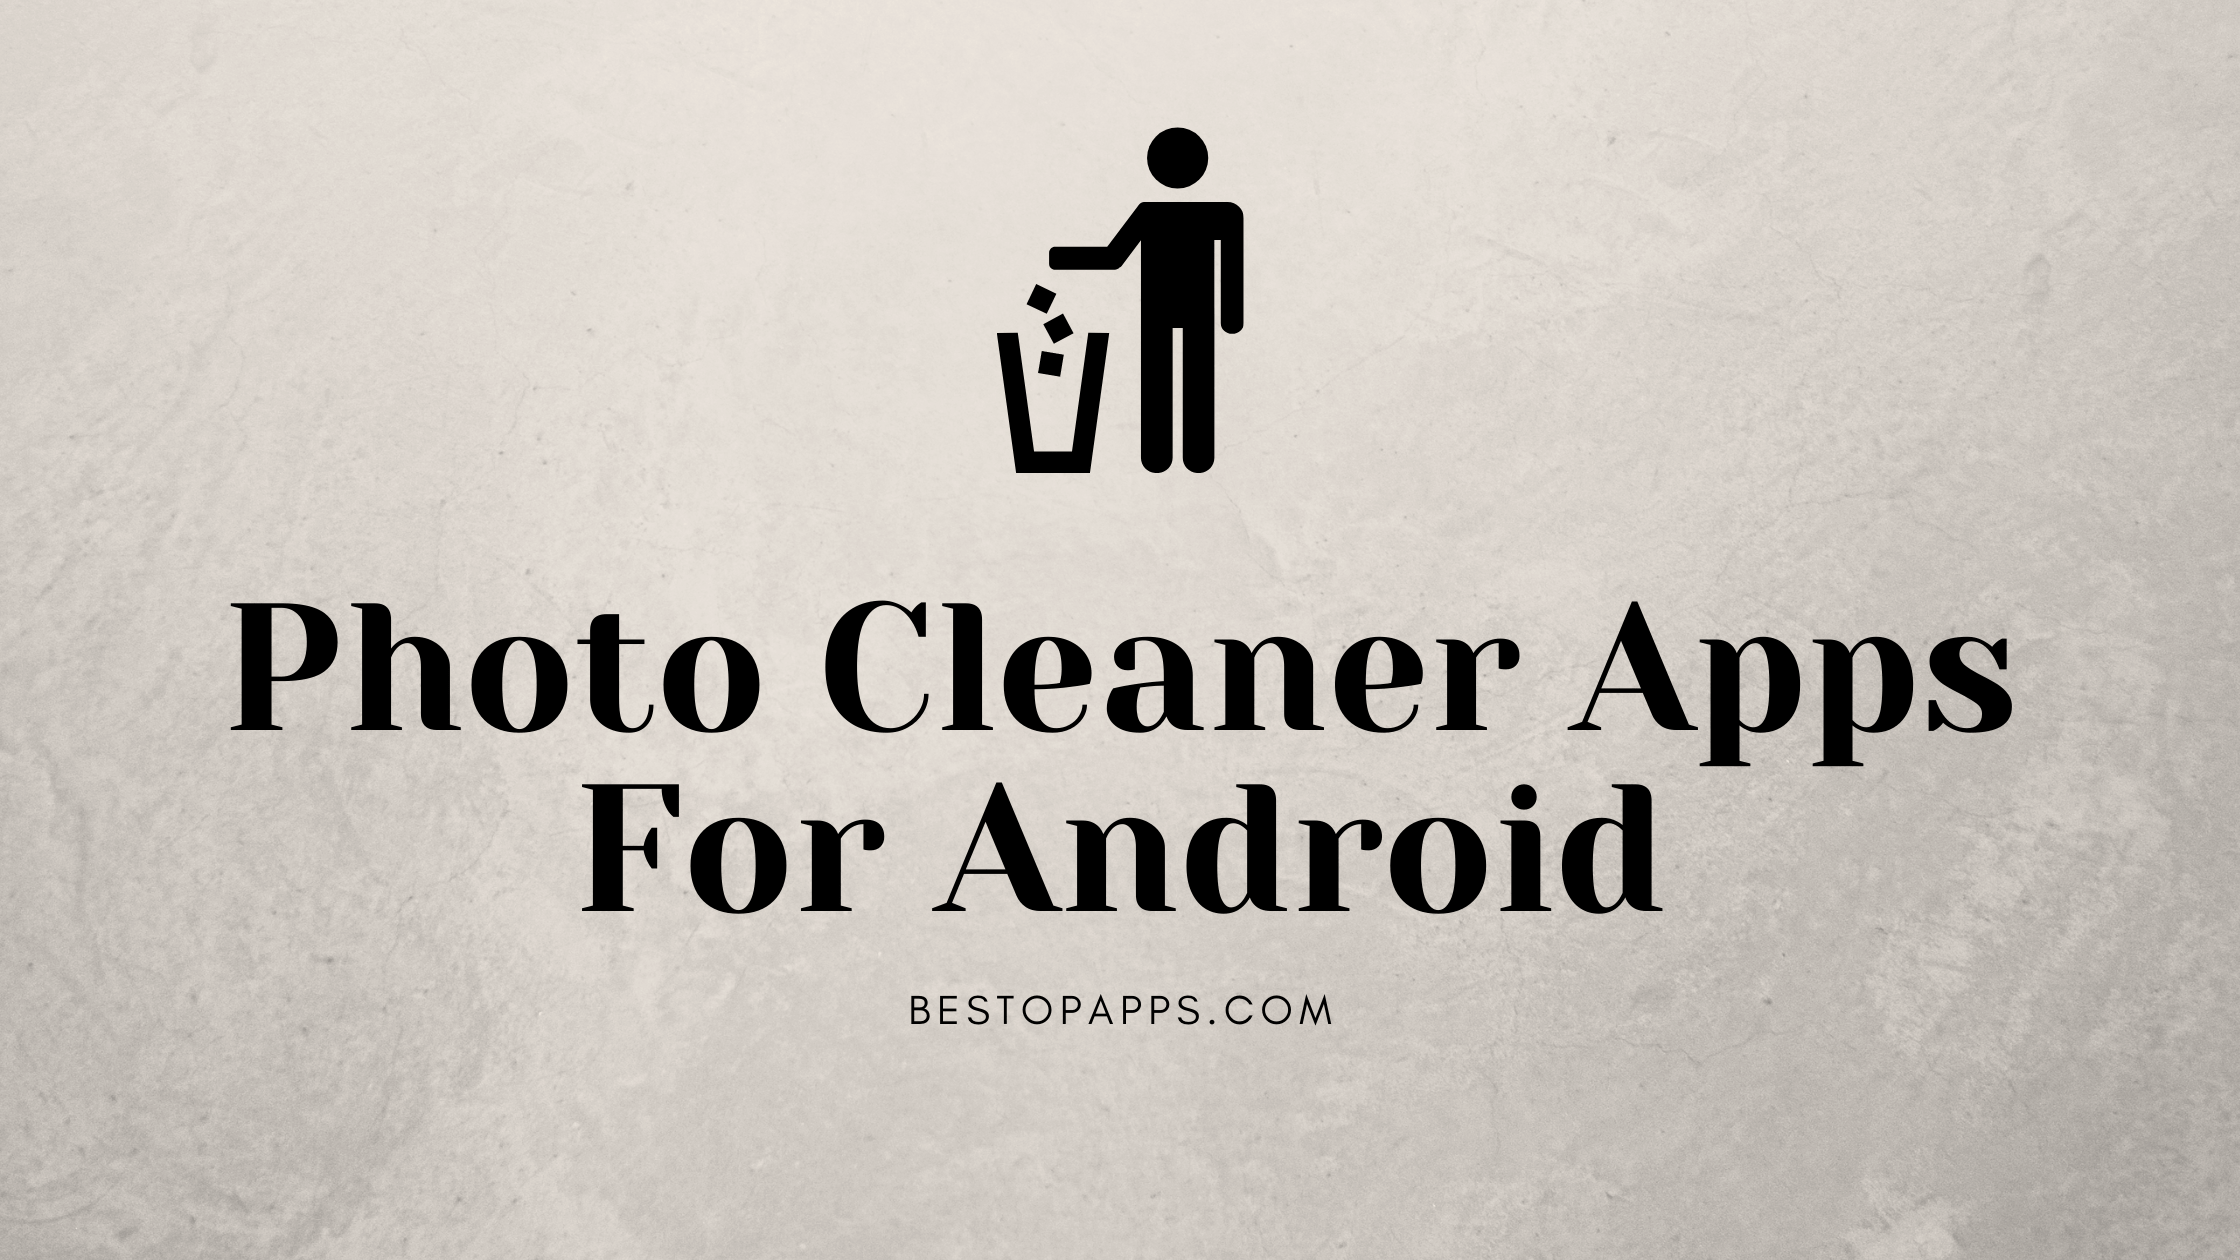 Photo Cleaner Apps For Android